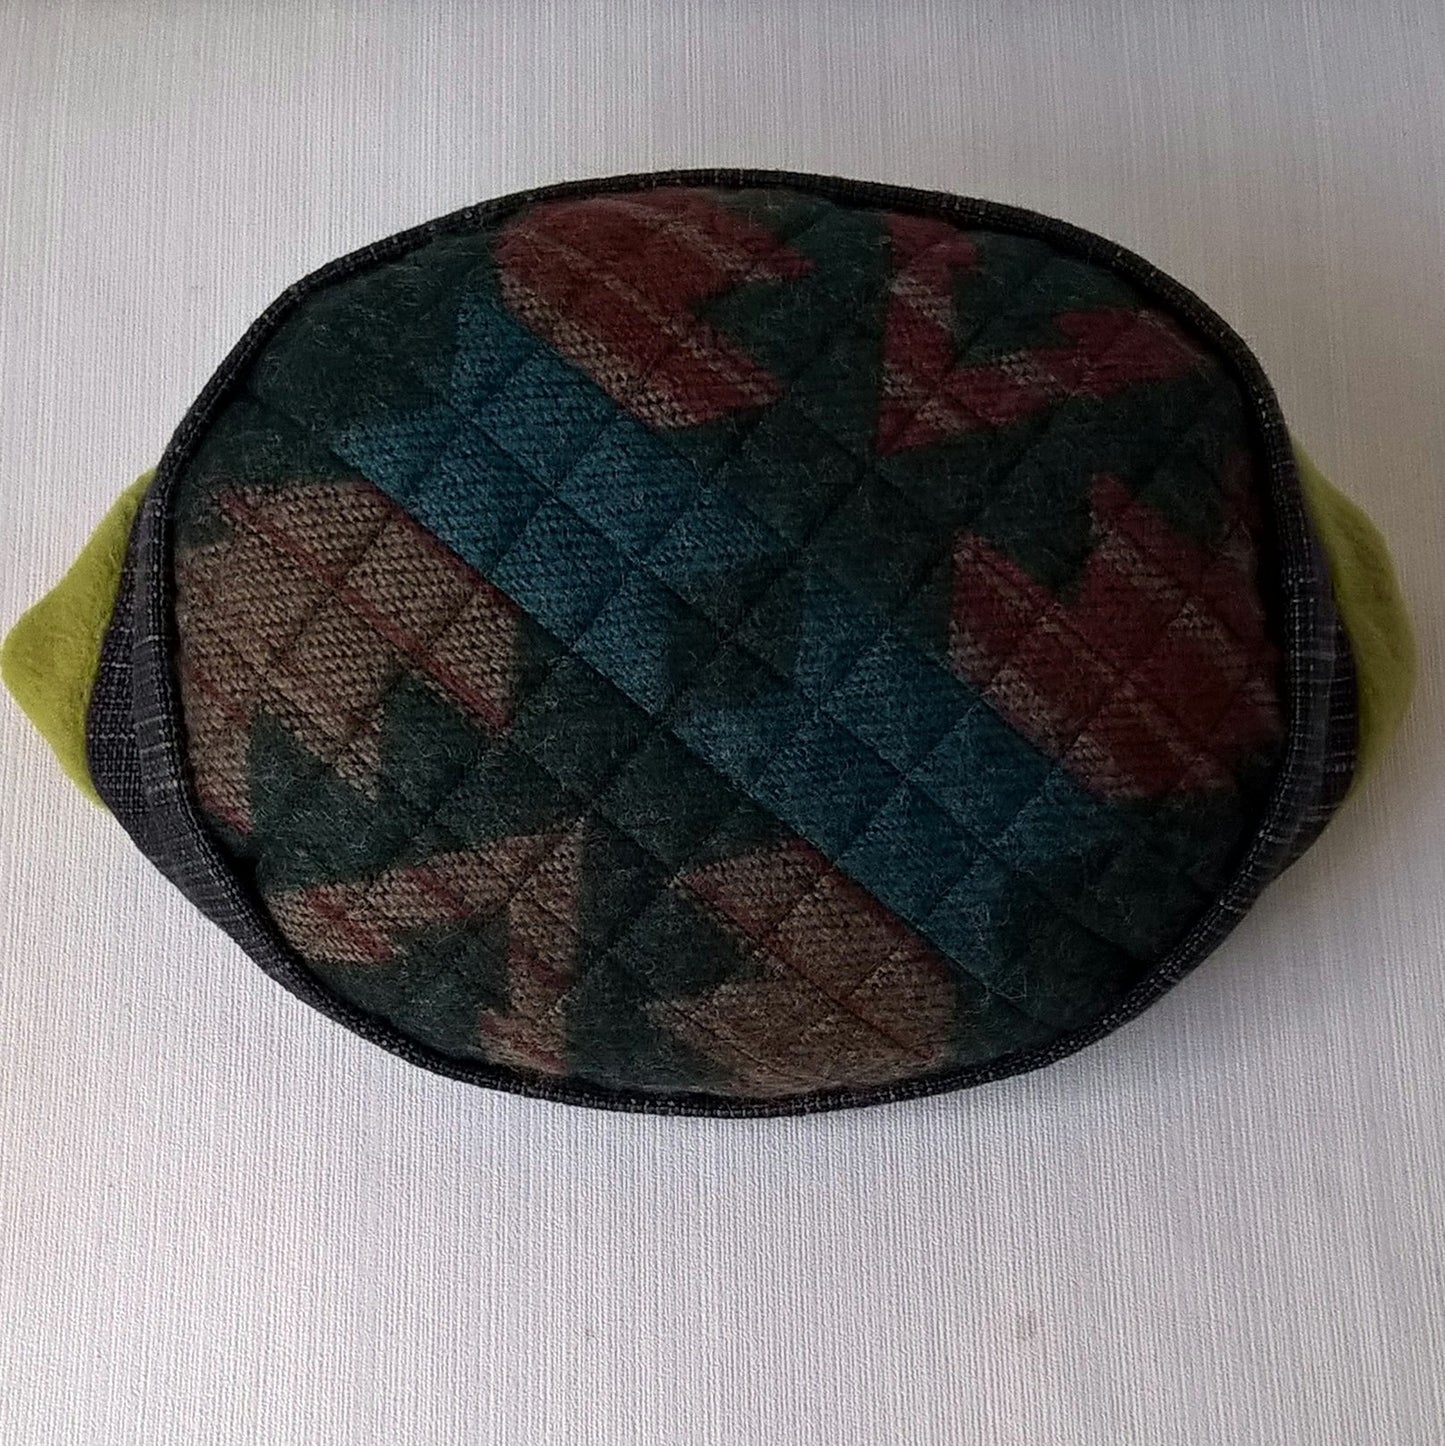 Aztec pattern on tip of hat